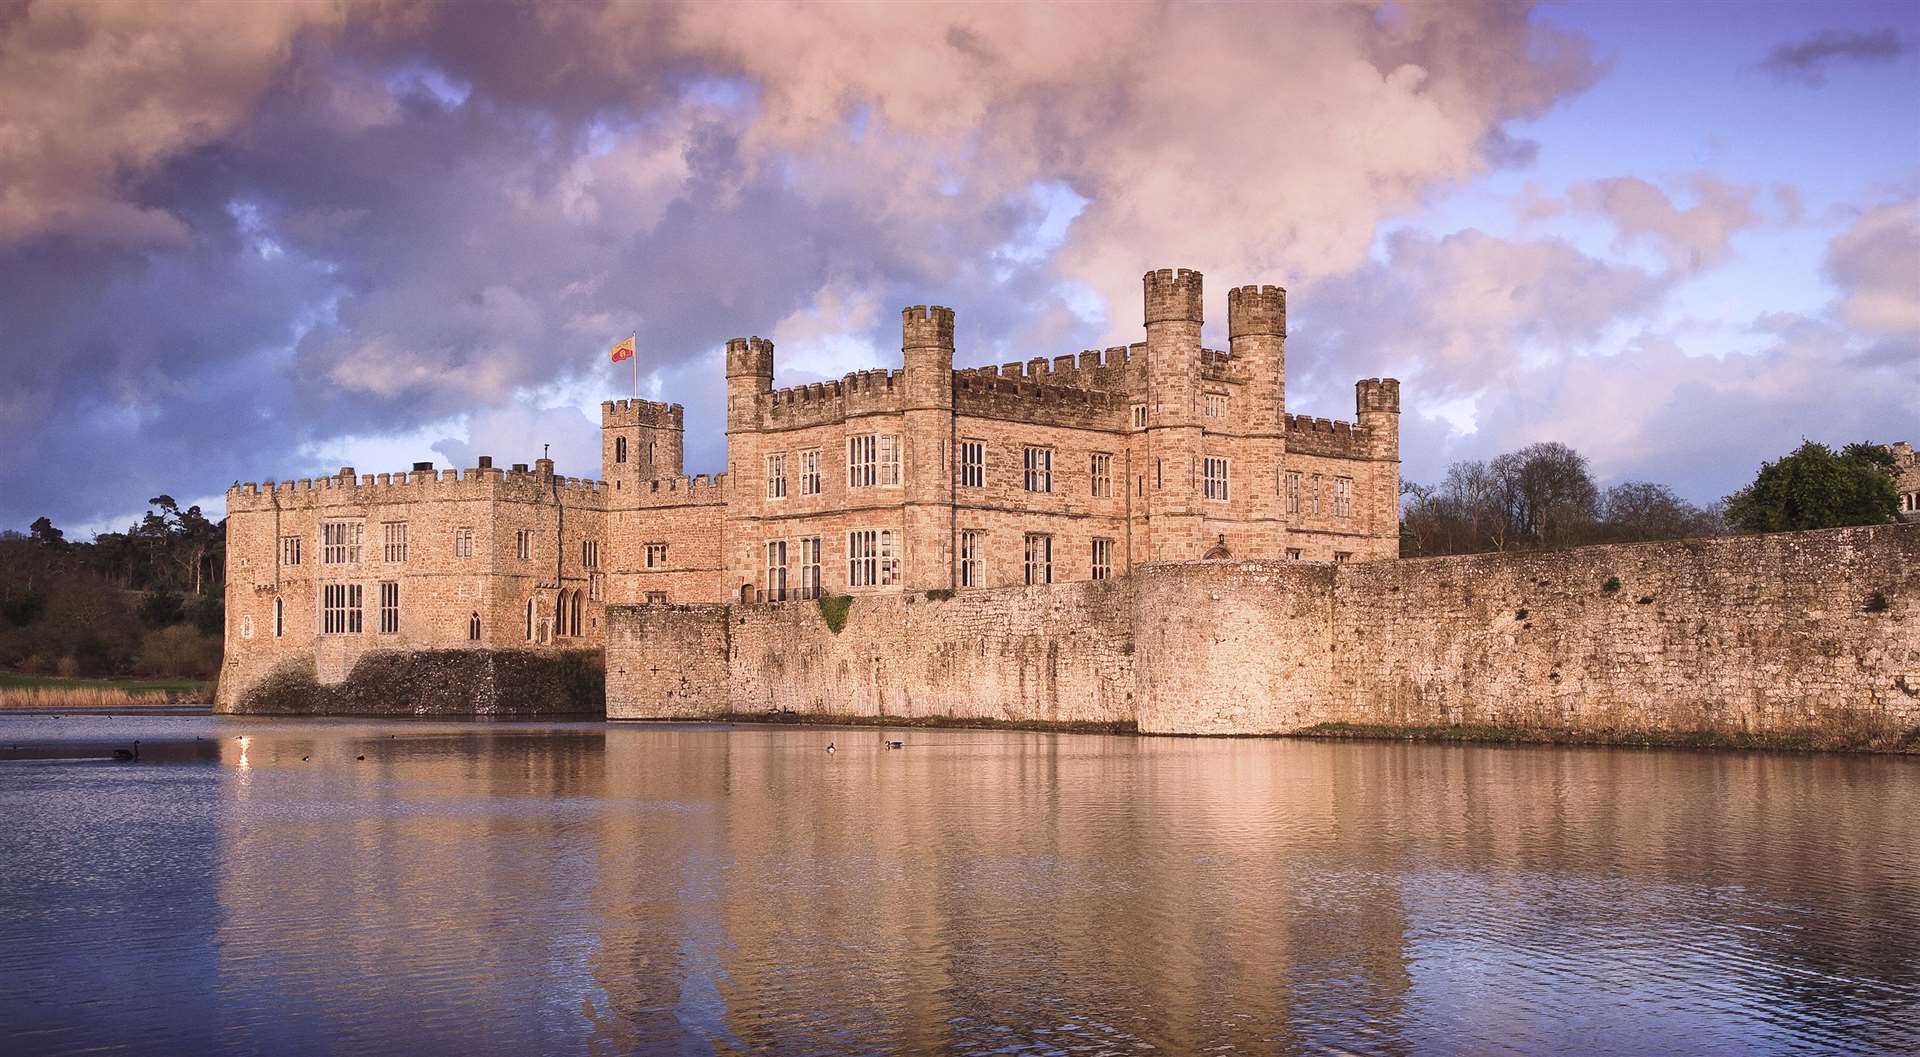 Leeds Castle, one of the many attractions Visit Kent uses to entice visitors in